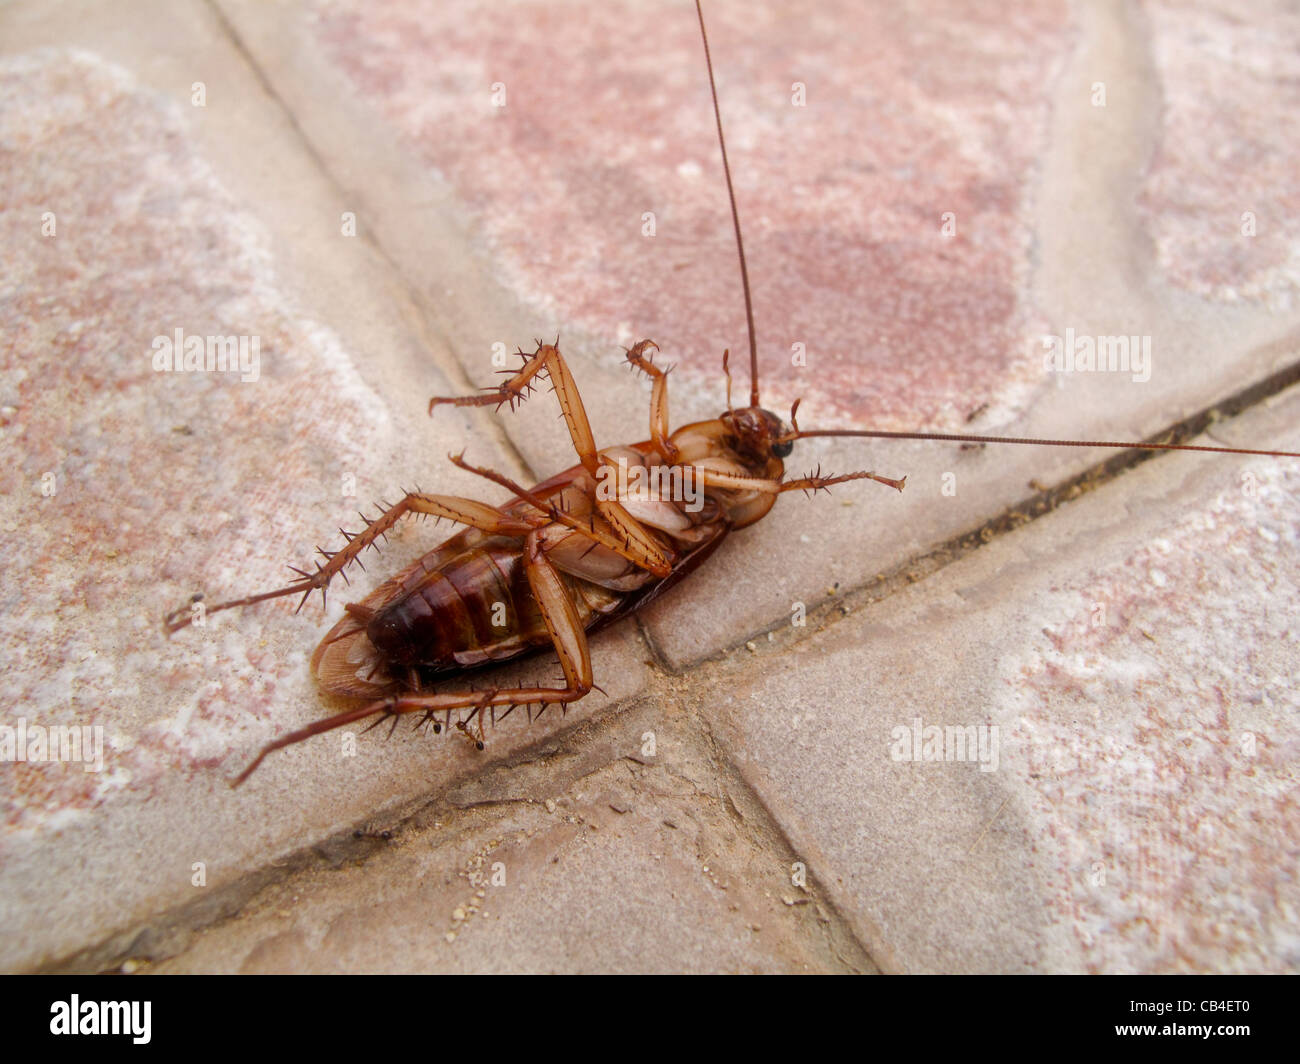 Dead cockroach lying on back with ants on paving slab Stock Photo